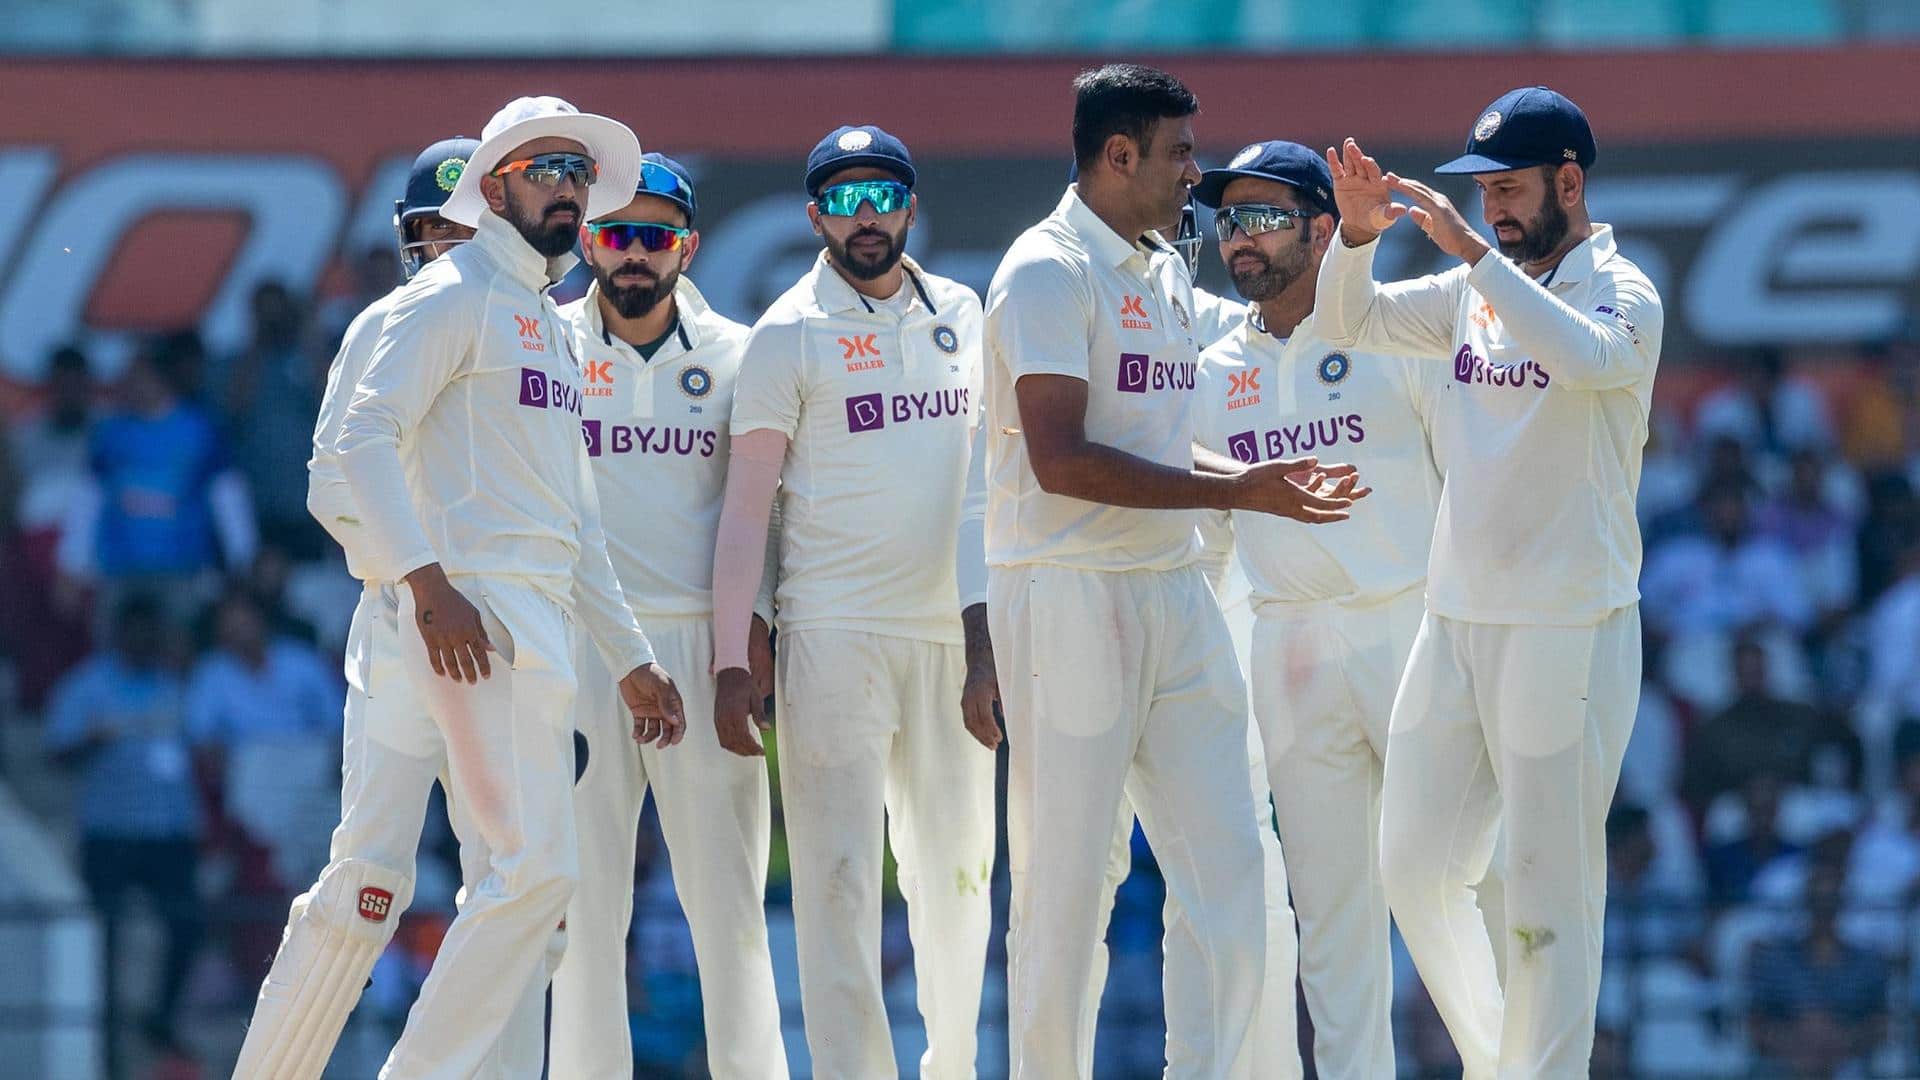 ICC Test Rankings: Ashwin climbs to second spot among bowlers